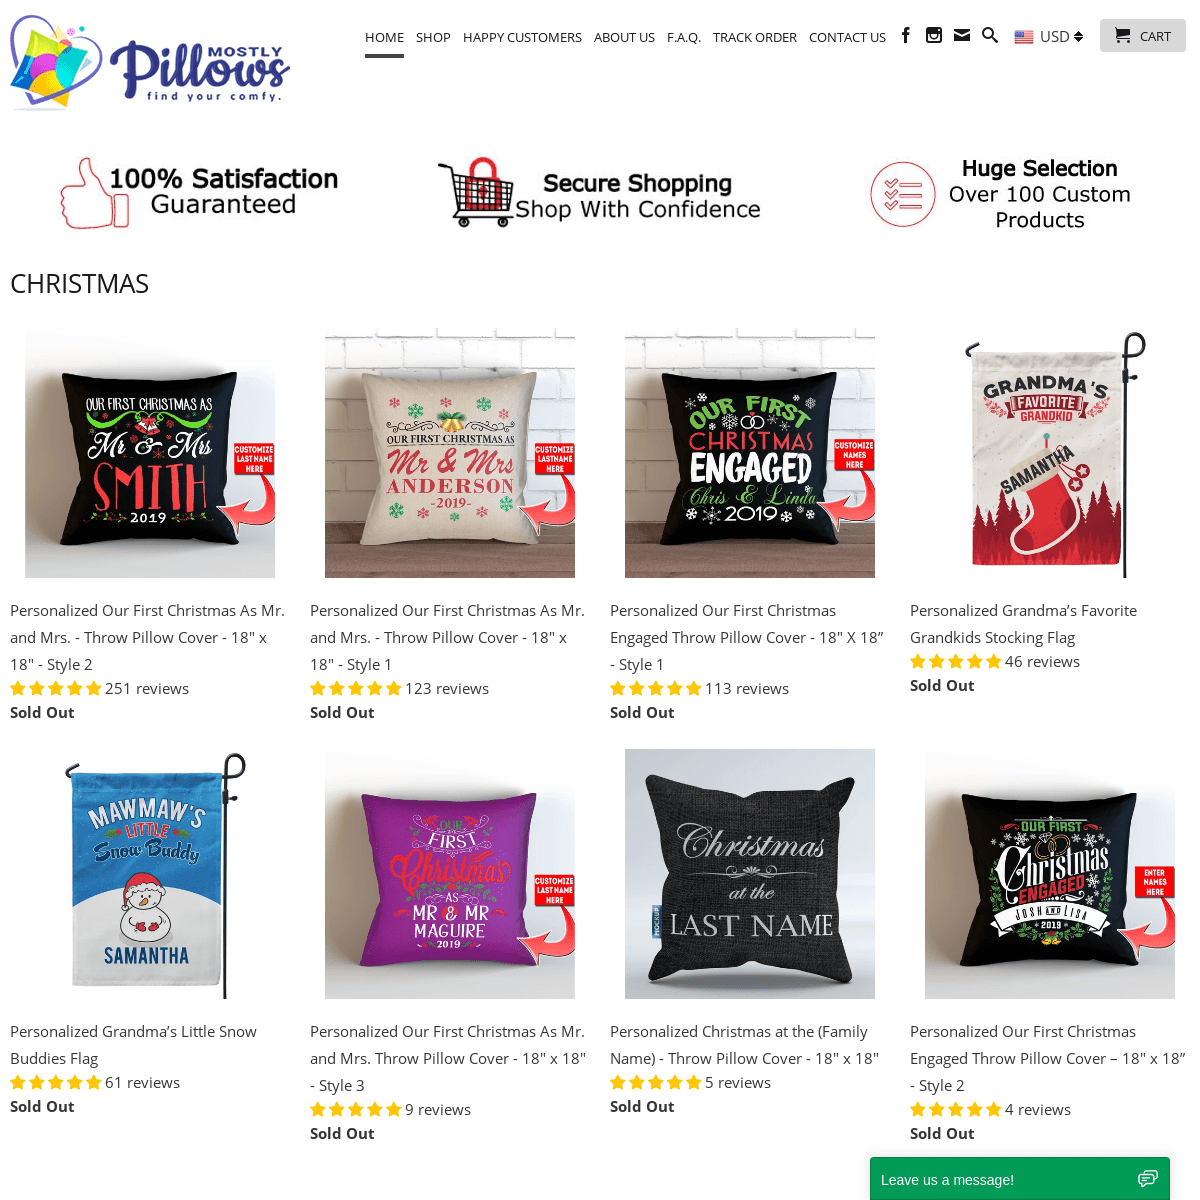 A complete backup of mostlypillows.com